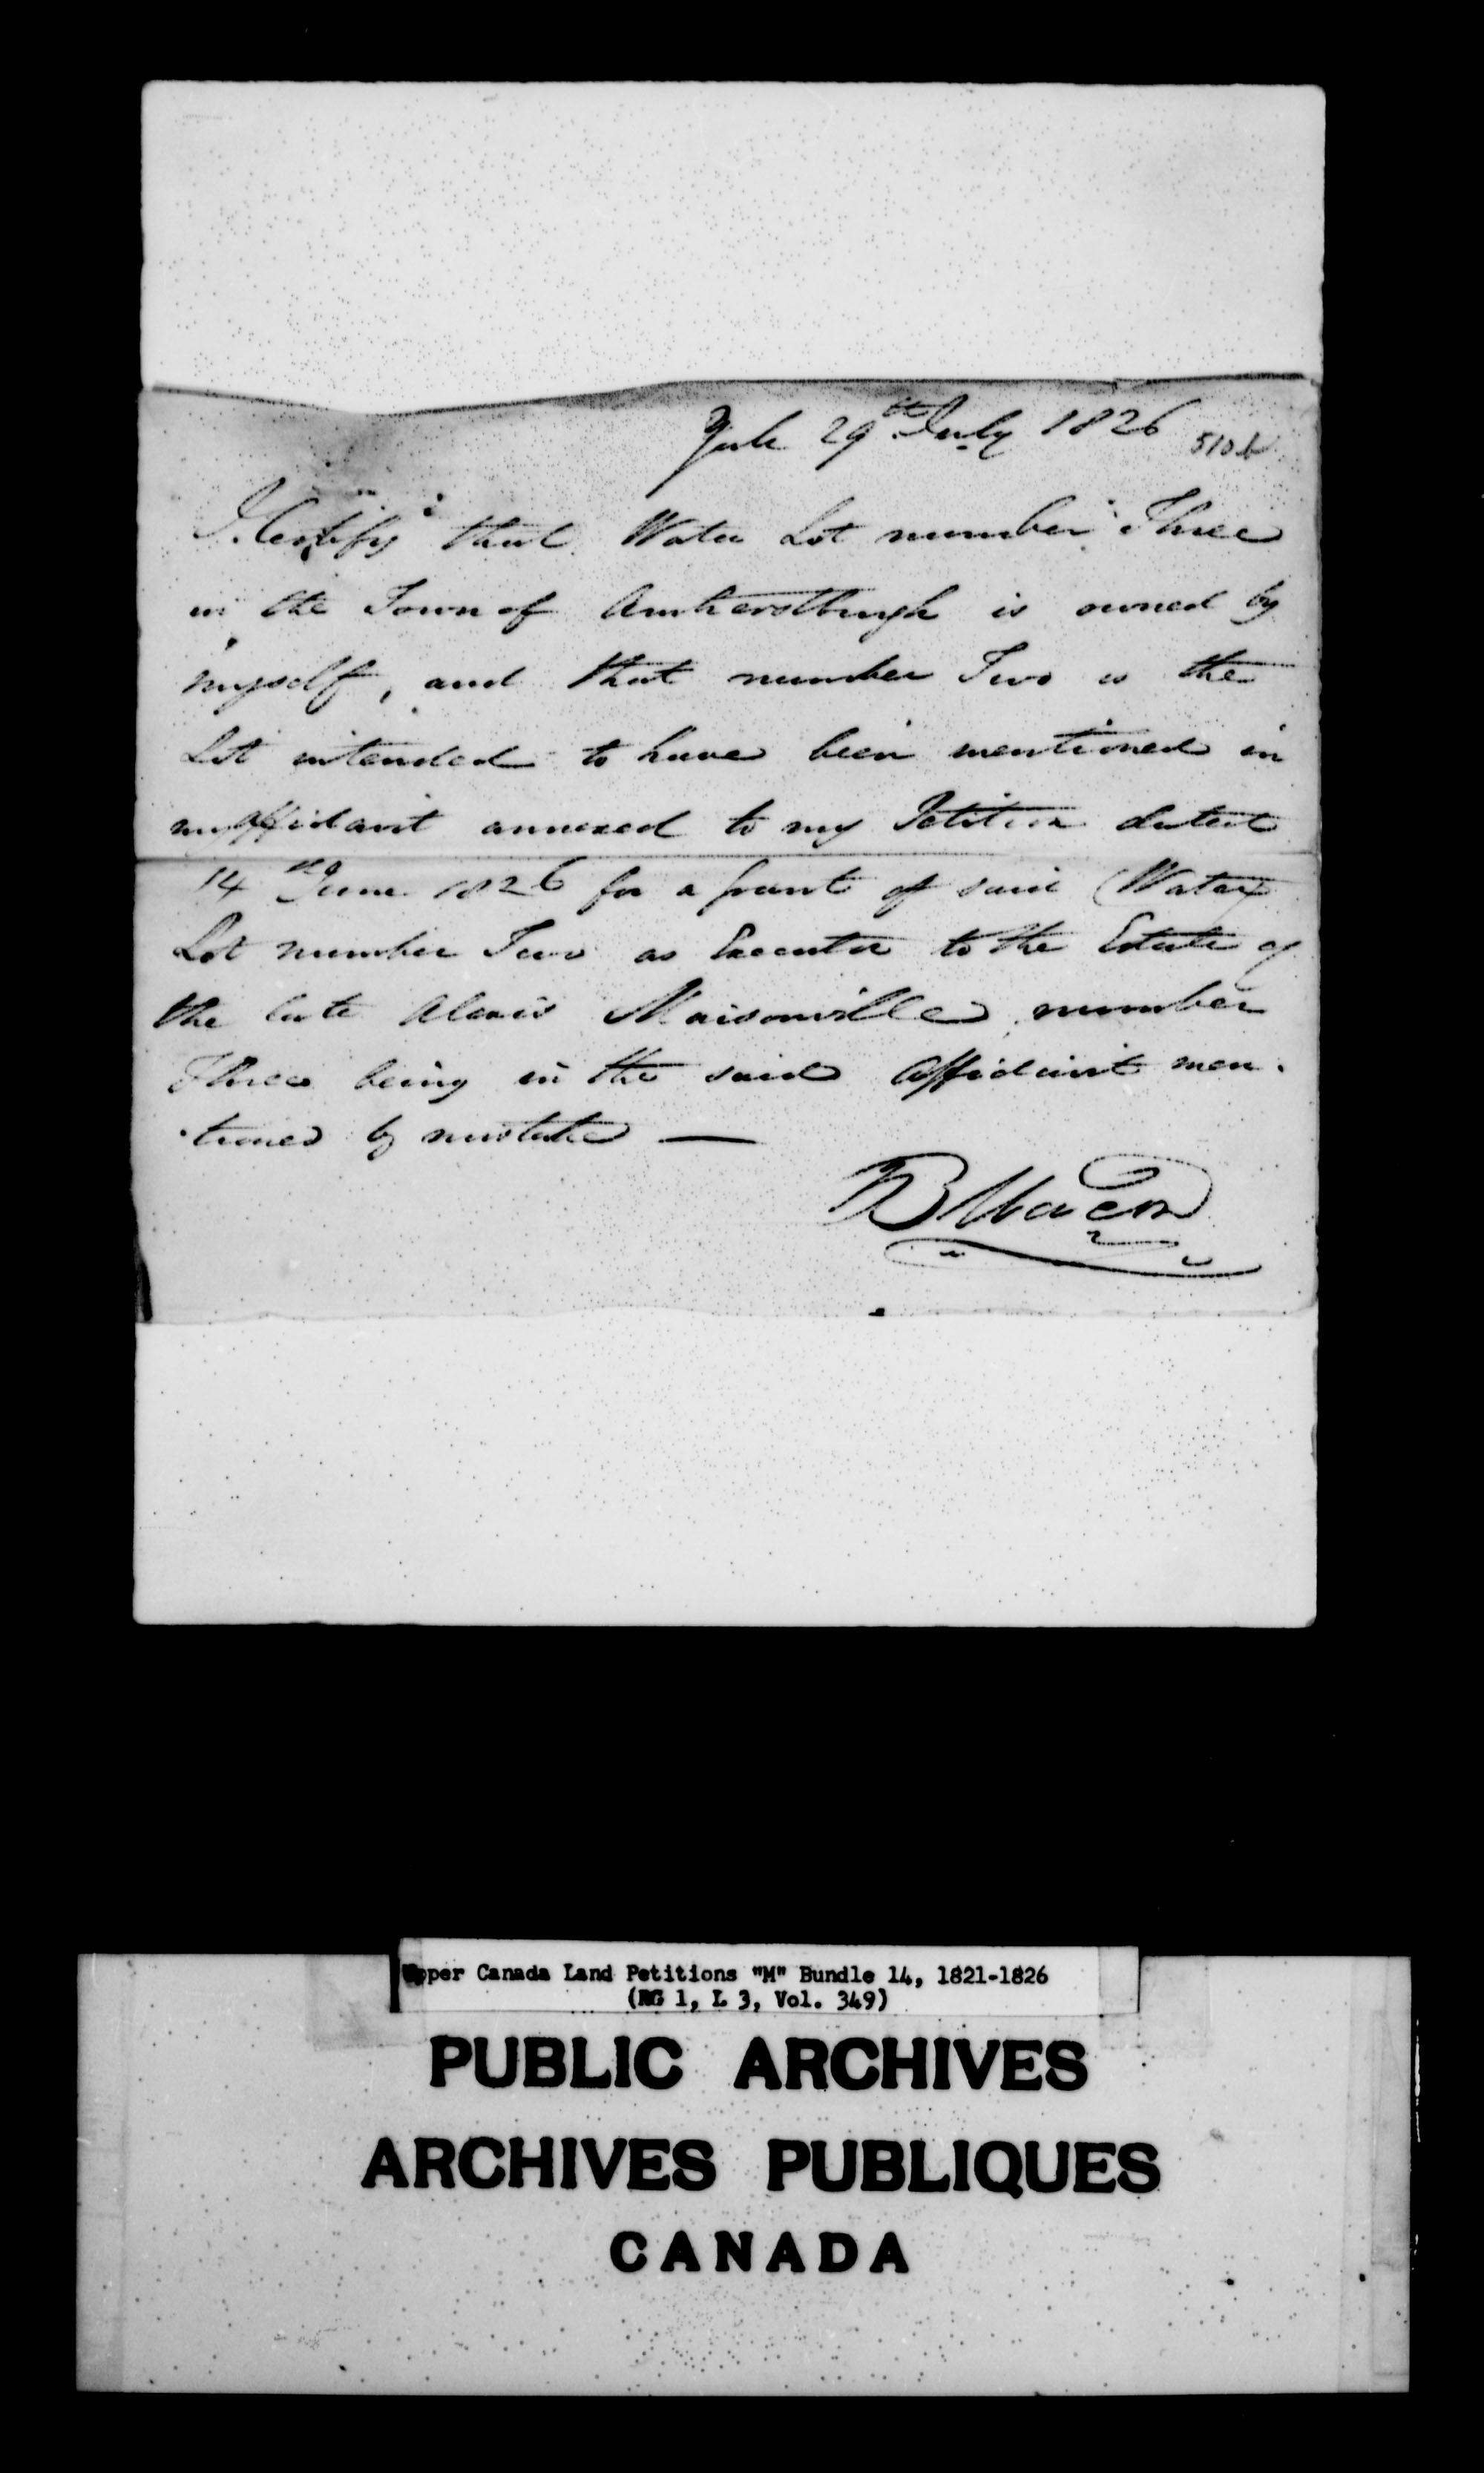 Title: Upper Canada Land Petitions (1763-1865) - Mikan Number: 205131 - Microform: c-2207